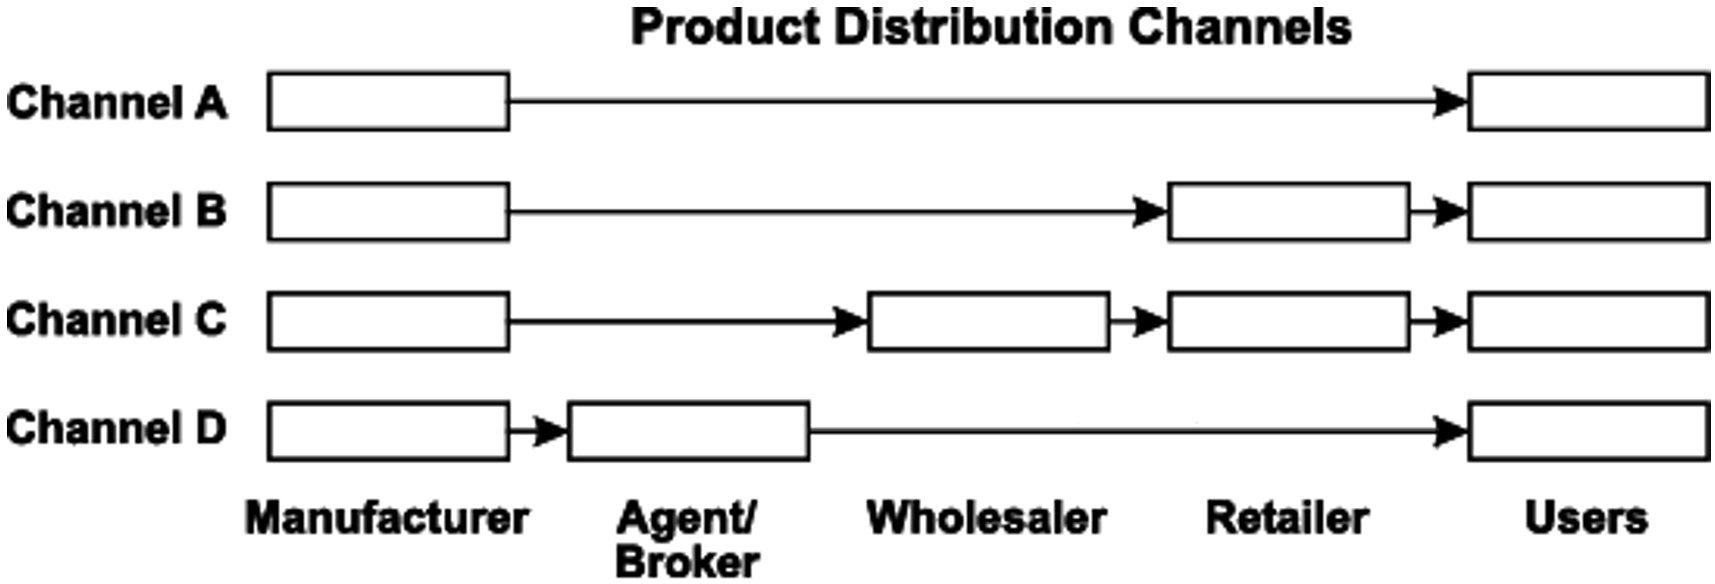 chart depicting product distribution channels